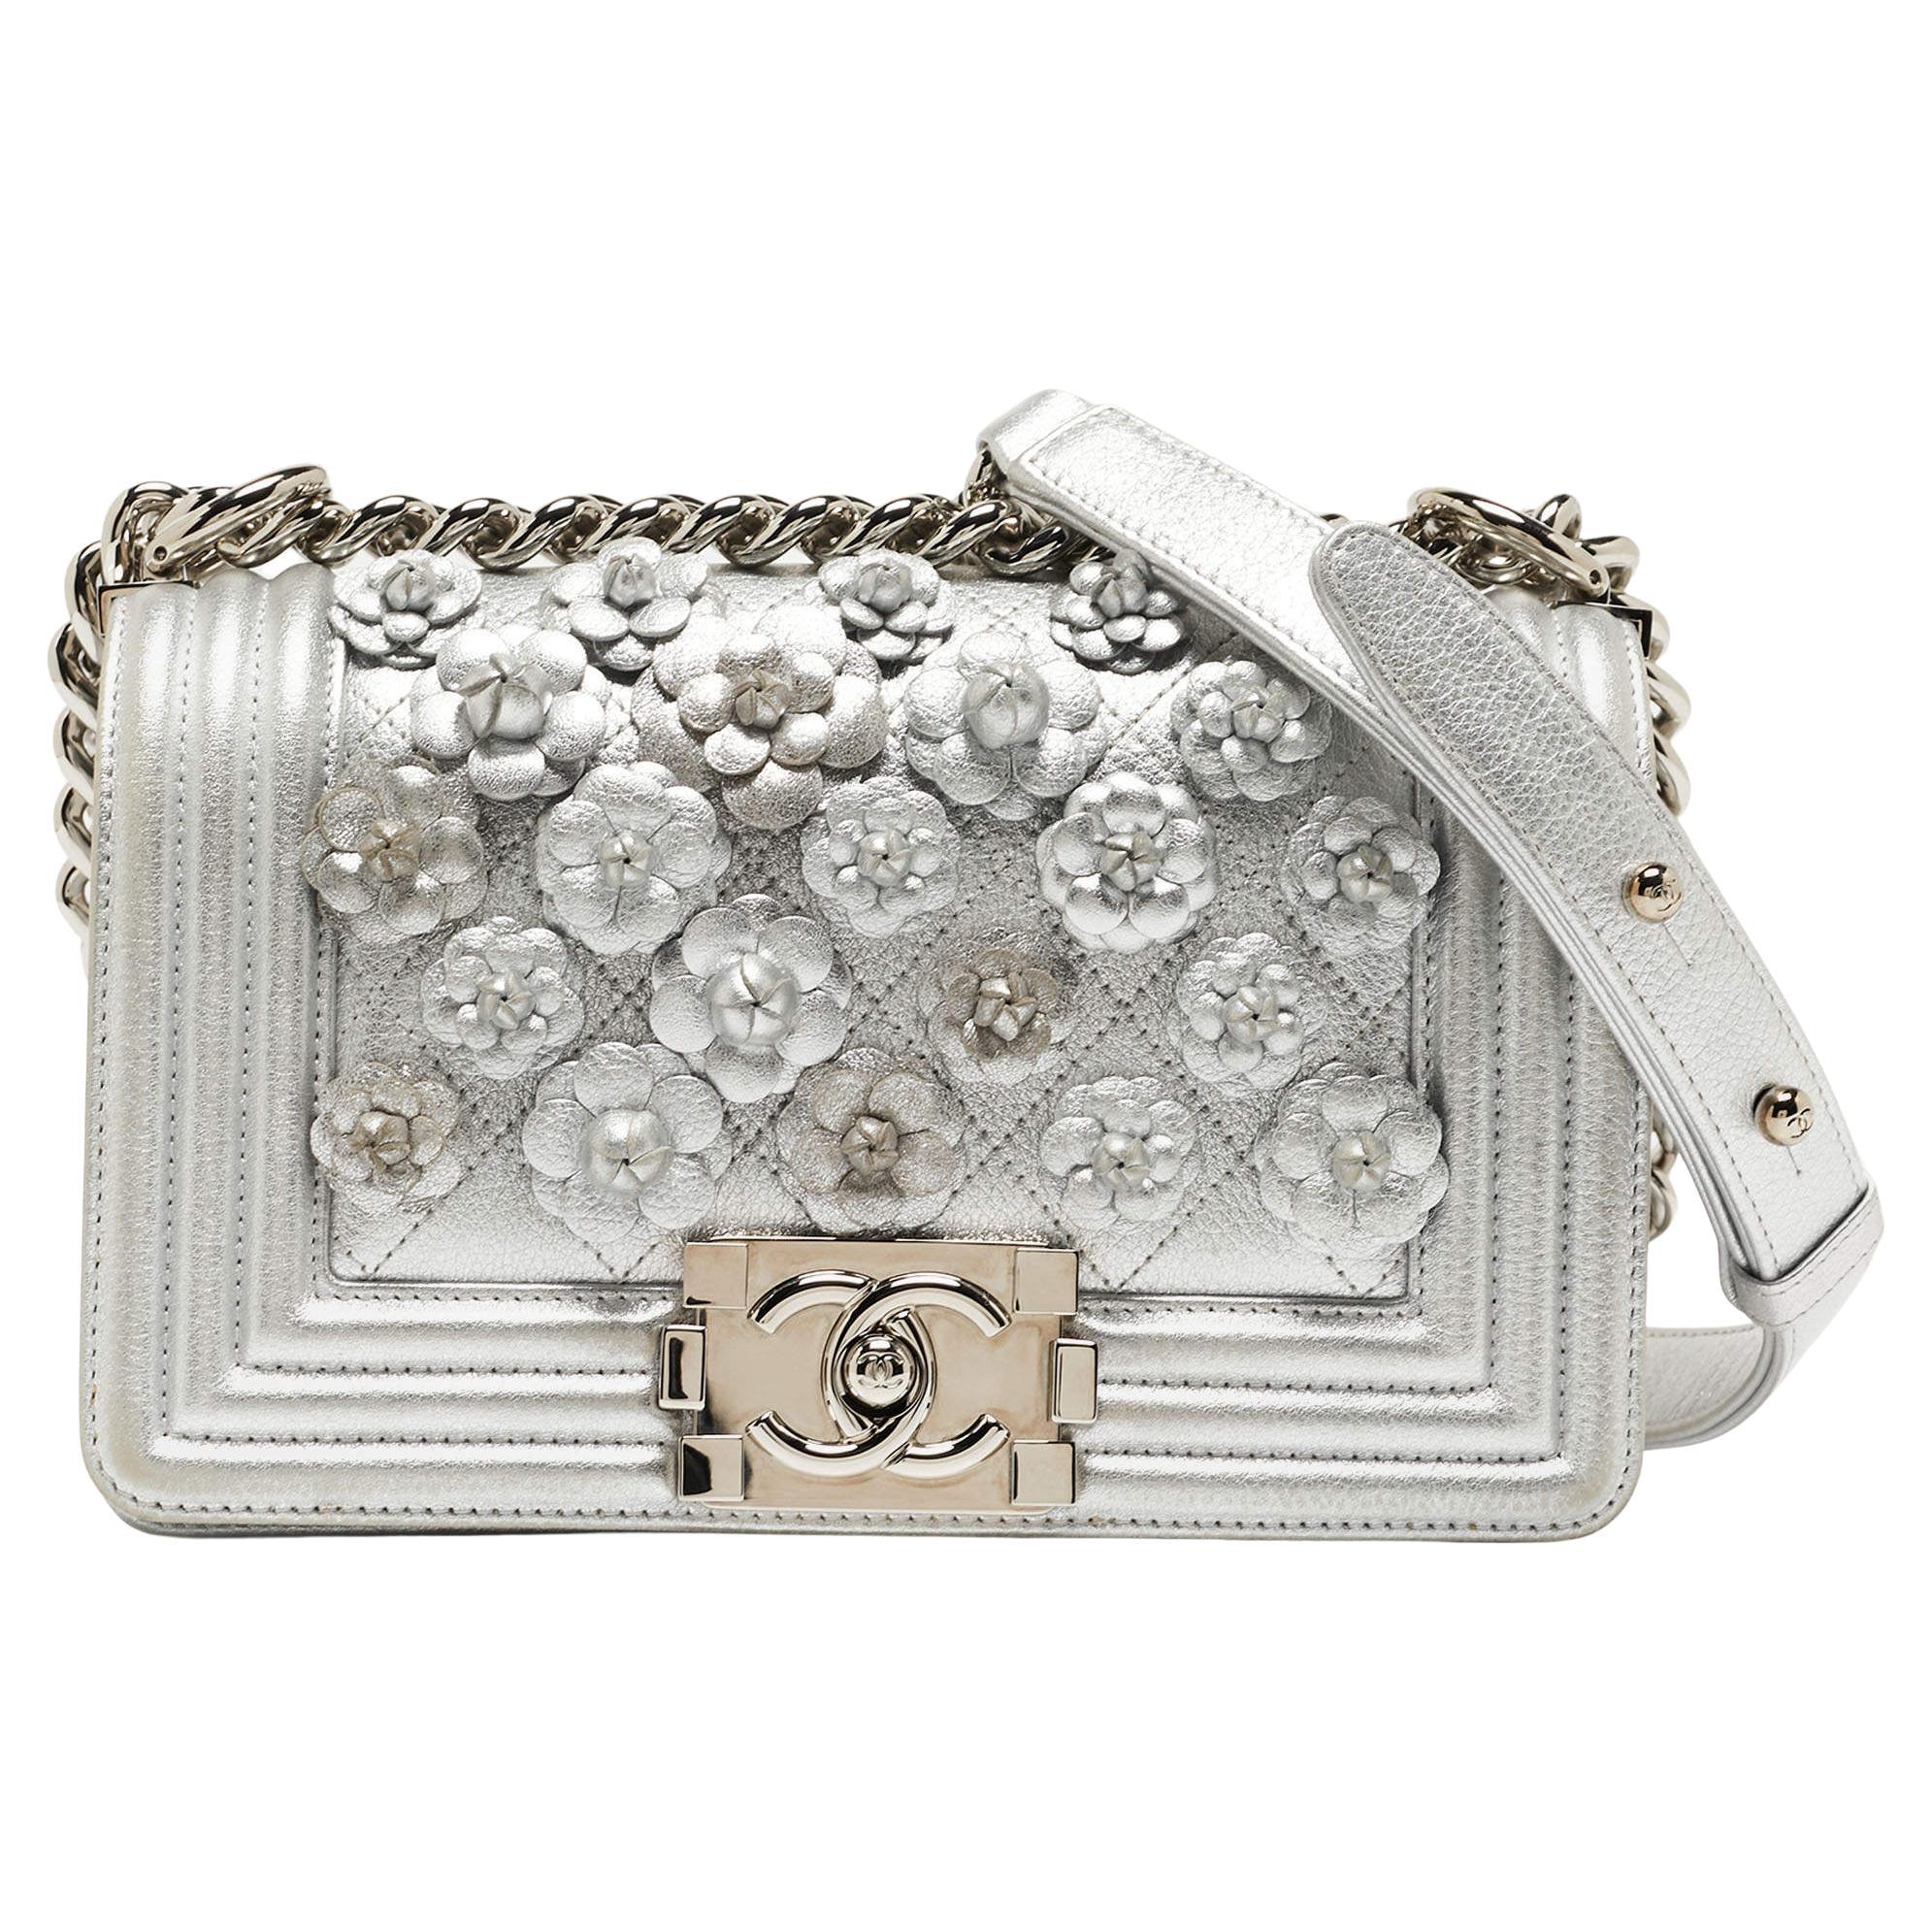 Chanel Silver Quilted Leather Small Camellia Applique Boy Flap Bag For Sale